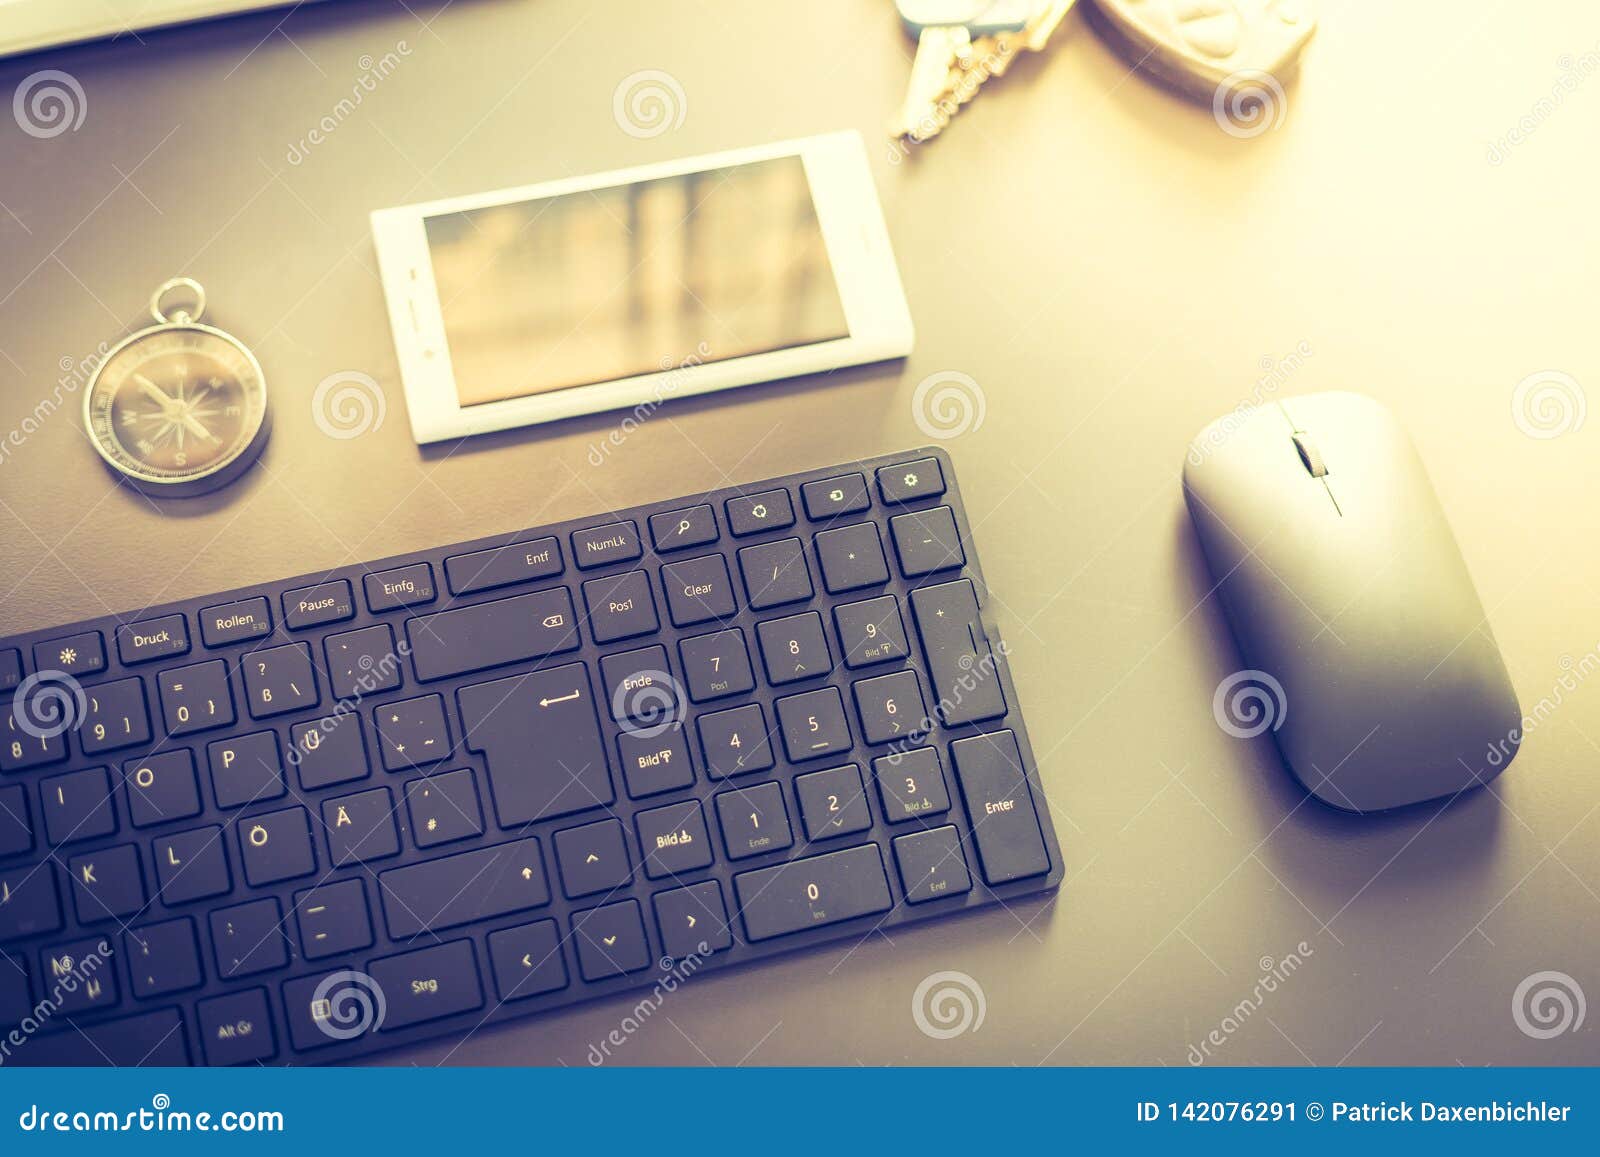 Web Business With Keyboard Compass And Smartphone Stock Image